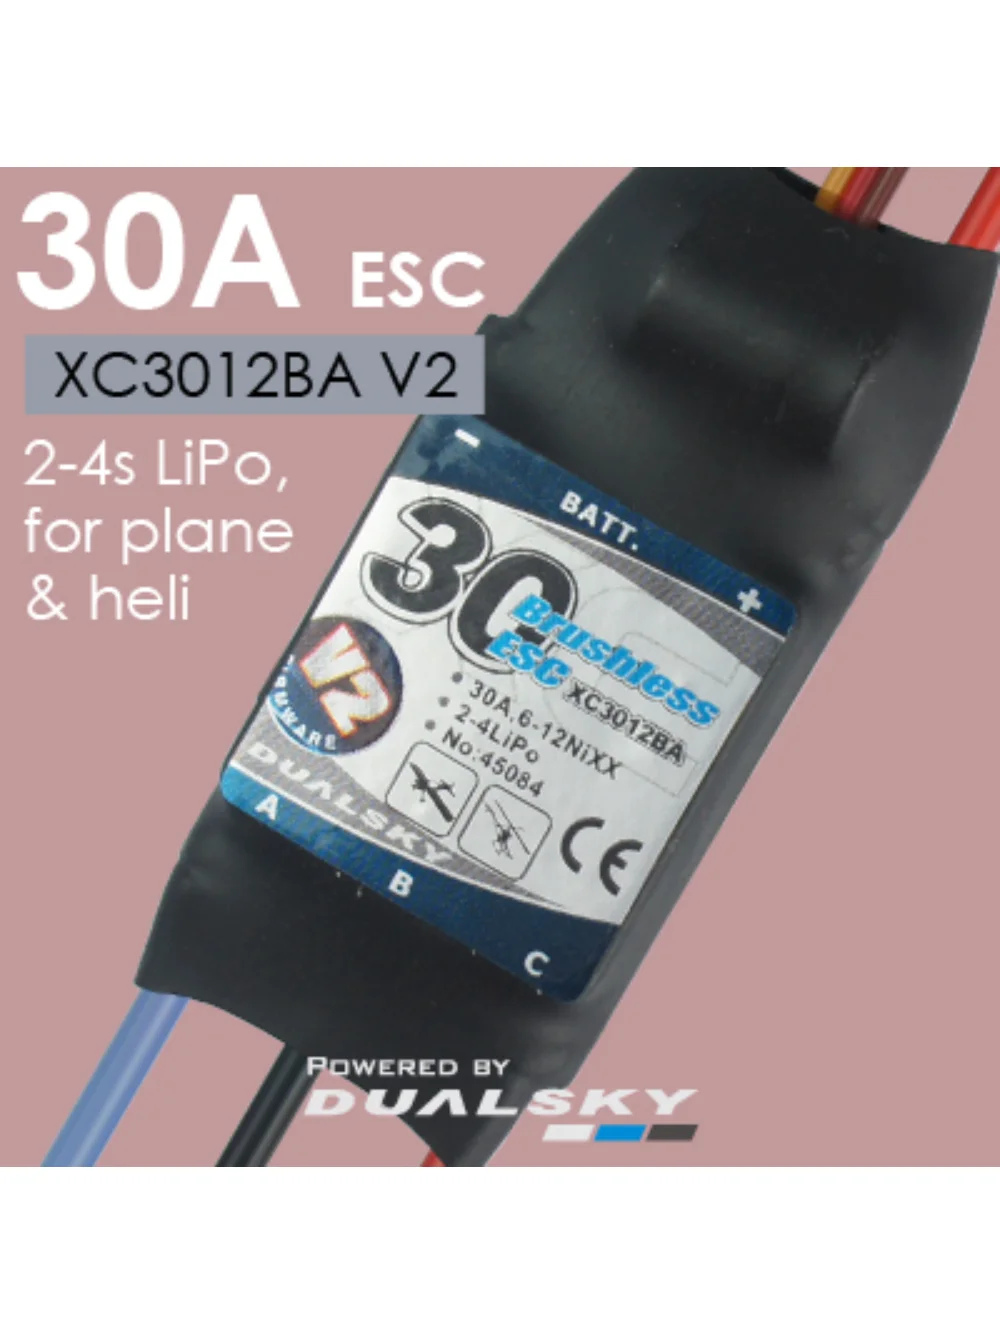 

DUALSKY XC3012BA V2 Aircraft Model Fixed Wing 30A ESC Suport 2-4S LiPo 6-12S NiXX Battery for Plane Helicopters